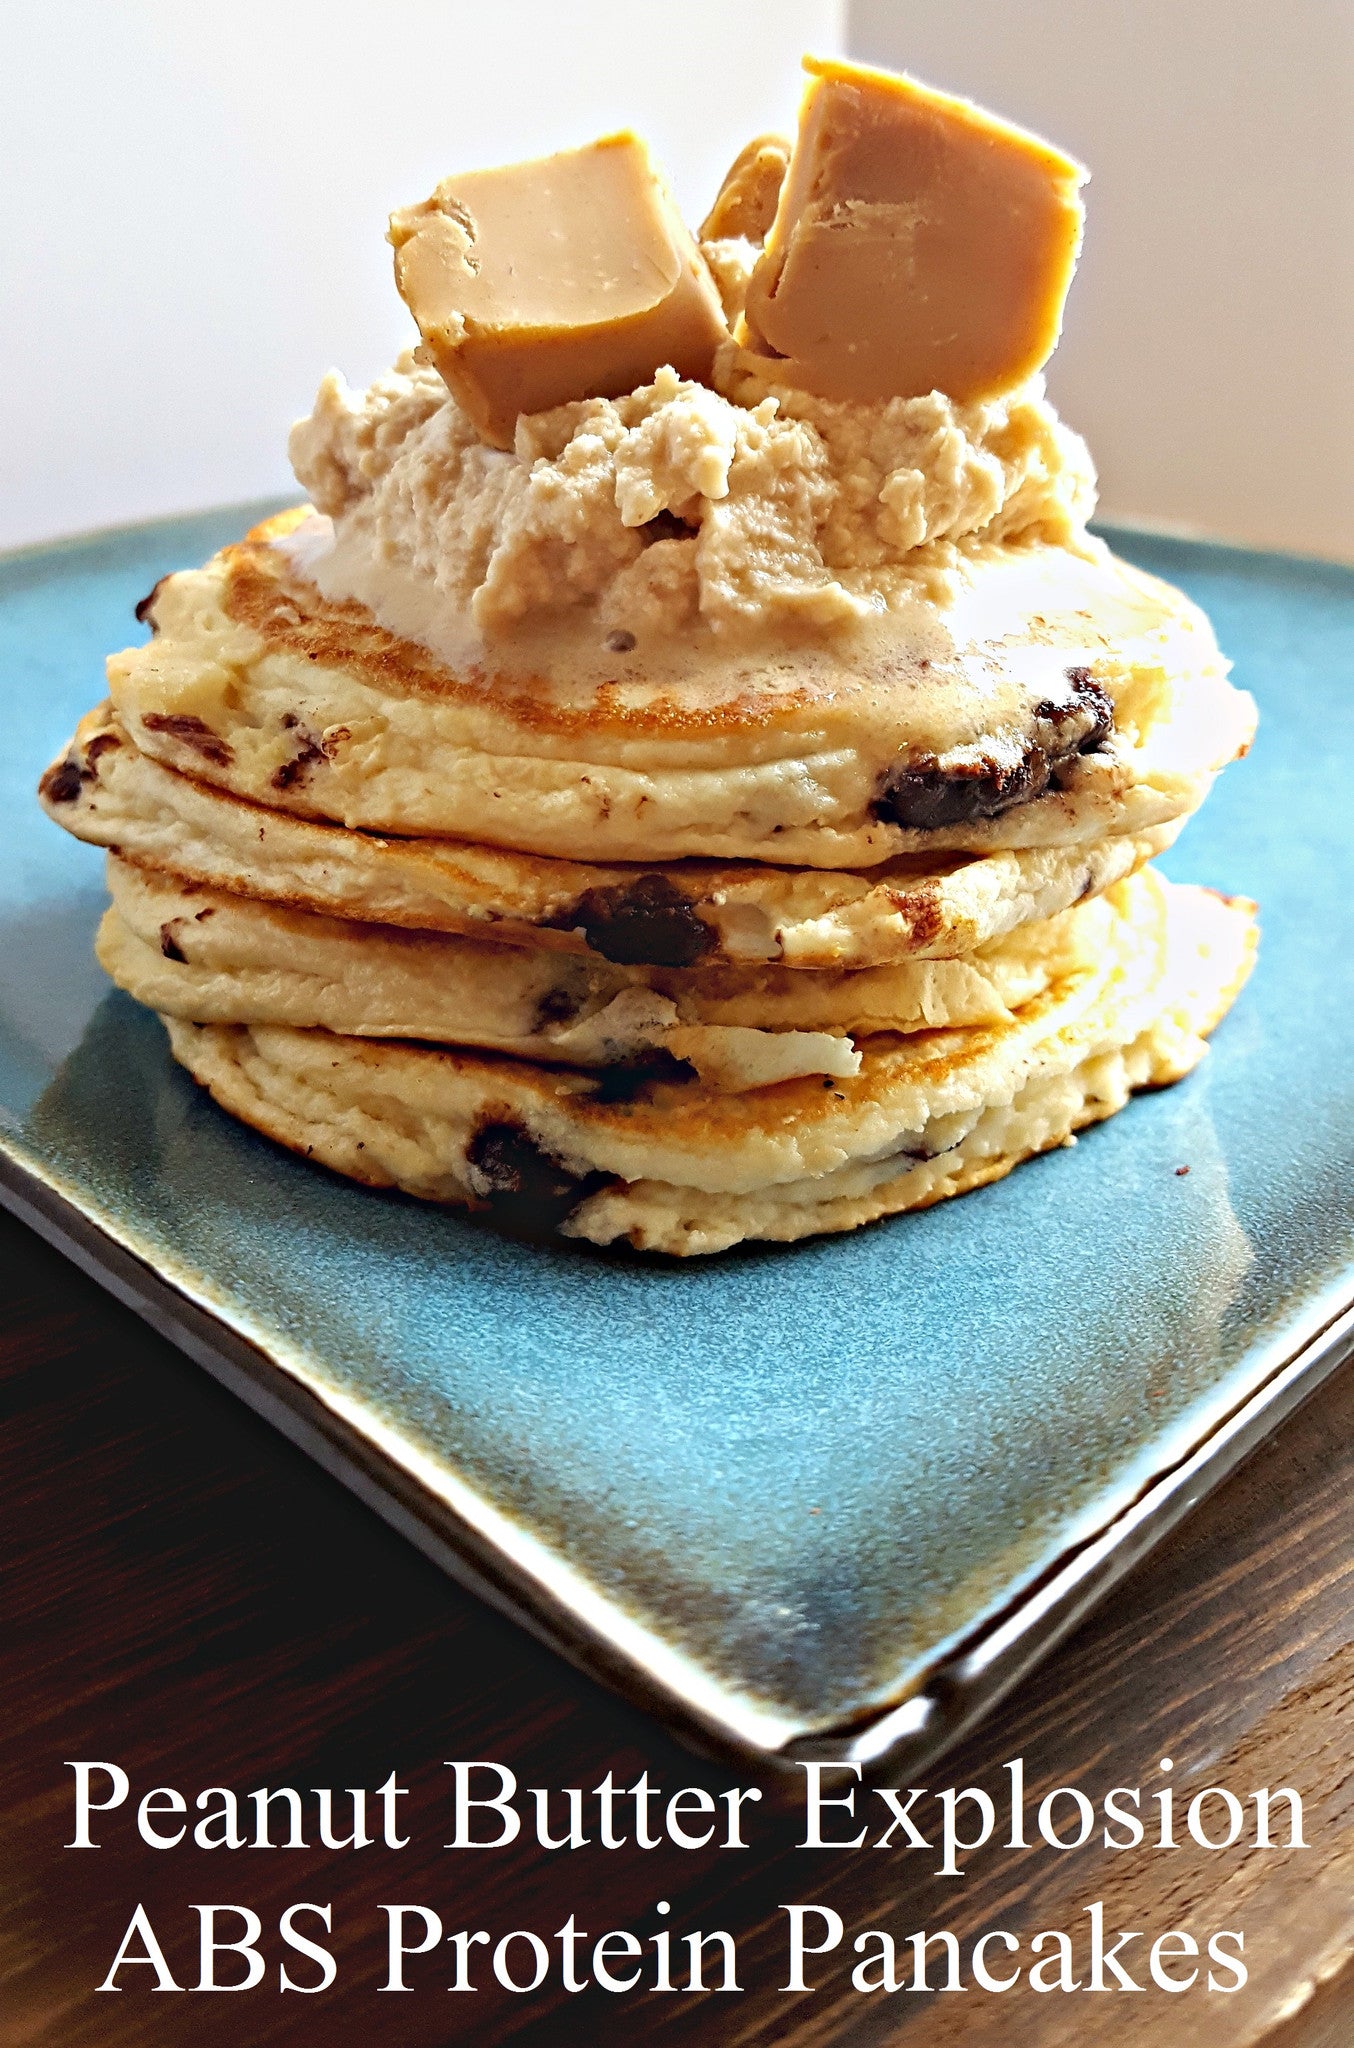 Peanut Butter Explosion ABS Protein Pancakes